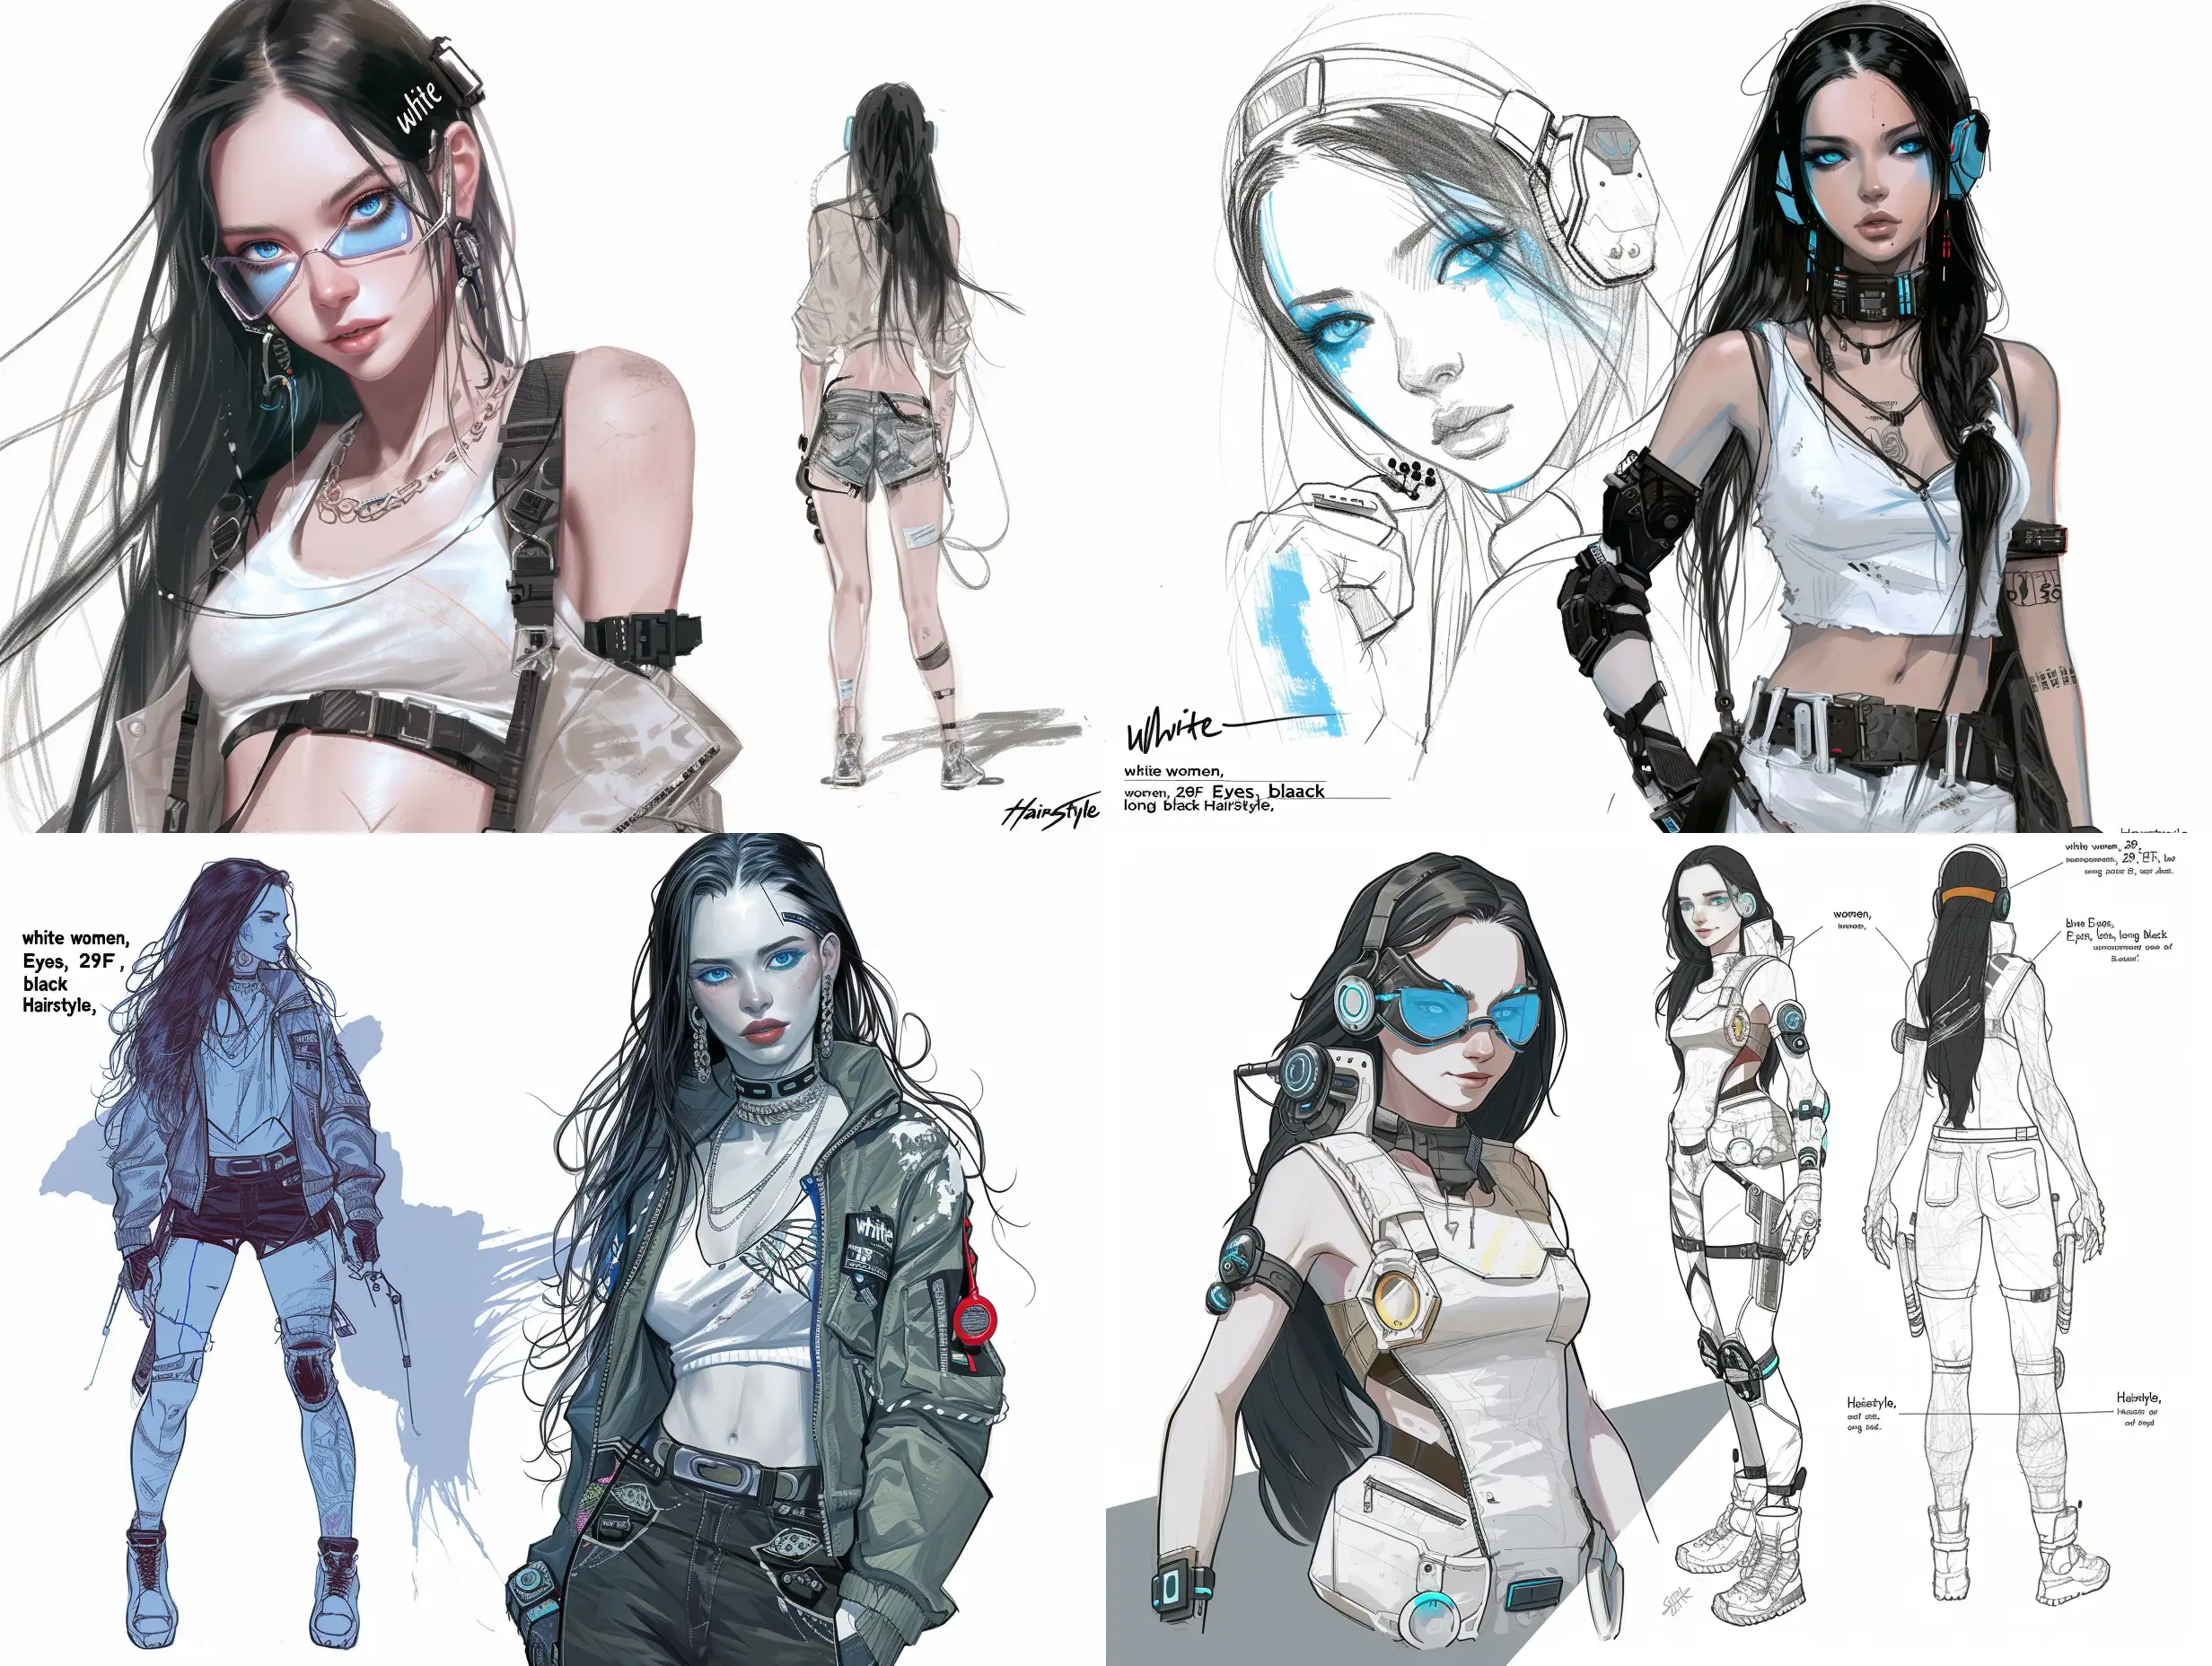  “white women, 29F, blue Eyes, long black Hairstyle,” American, cyberpunk outfit, looking at the viewer, sketch style, she standing, accessories, random body type, full body